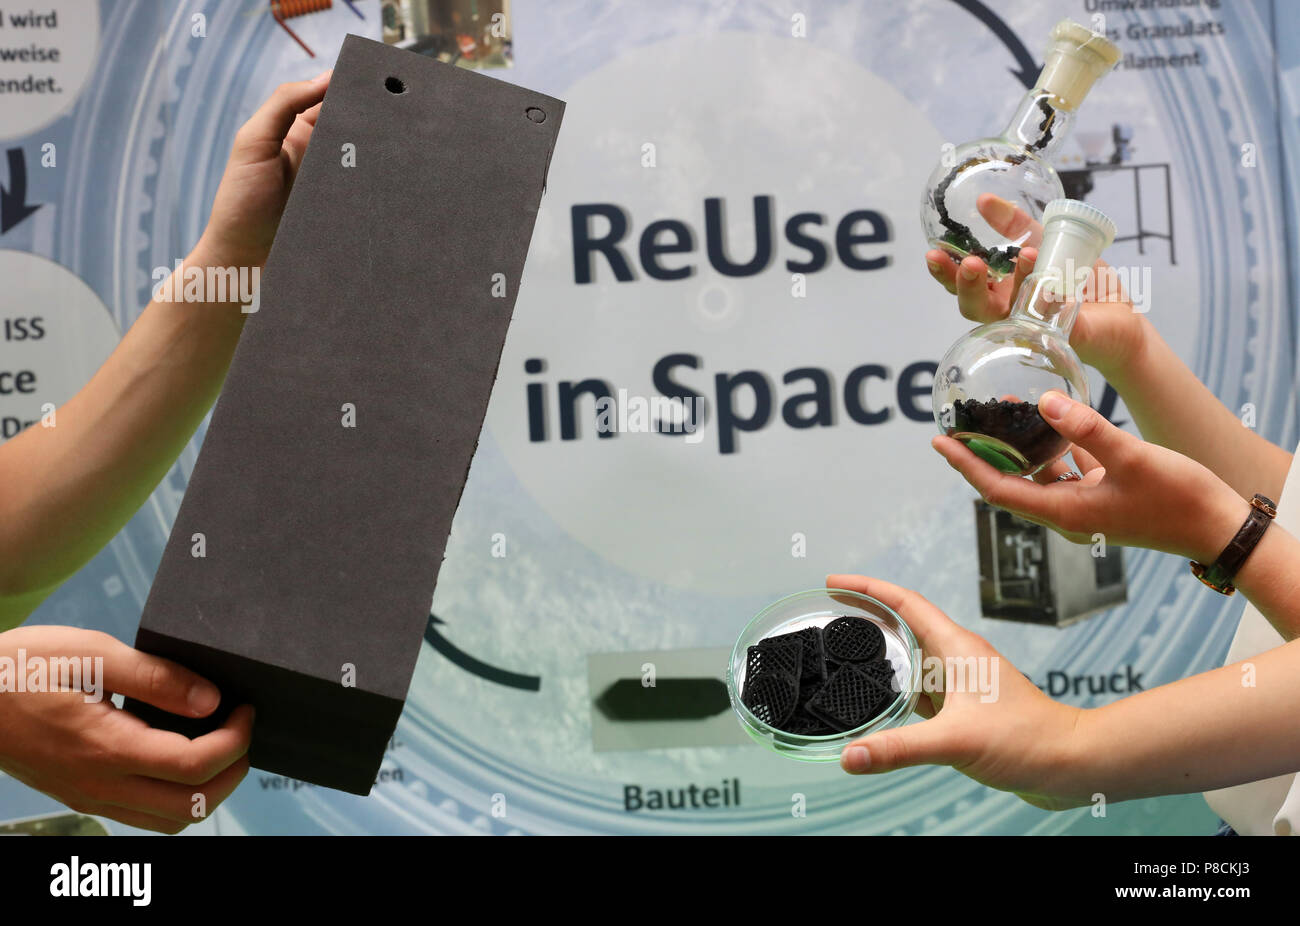 Rostock, Germany. 10th July, 2018. The high school students demonstrating their project 'ReUse in Space' in which plastic is recycled on the International Space Station (ISS). In the process, a 3D printer can be created with the accumulated plastic waste aboard the ISS. The 18-year-olds have won the 'Jugend Forscht' competition with this idea and are now presenting their project to representatives of the airbus space sector. Credit: Bernd Wüstneck/dpa/Alamy Live News Stock Photo